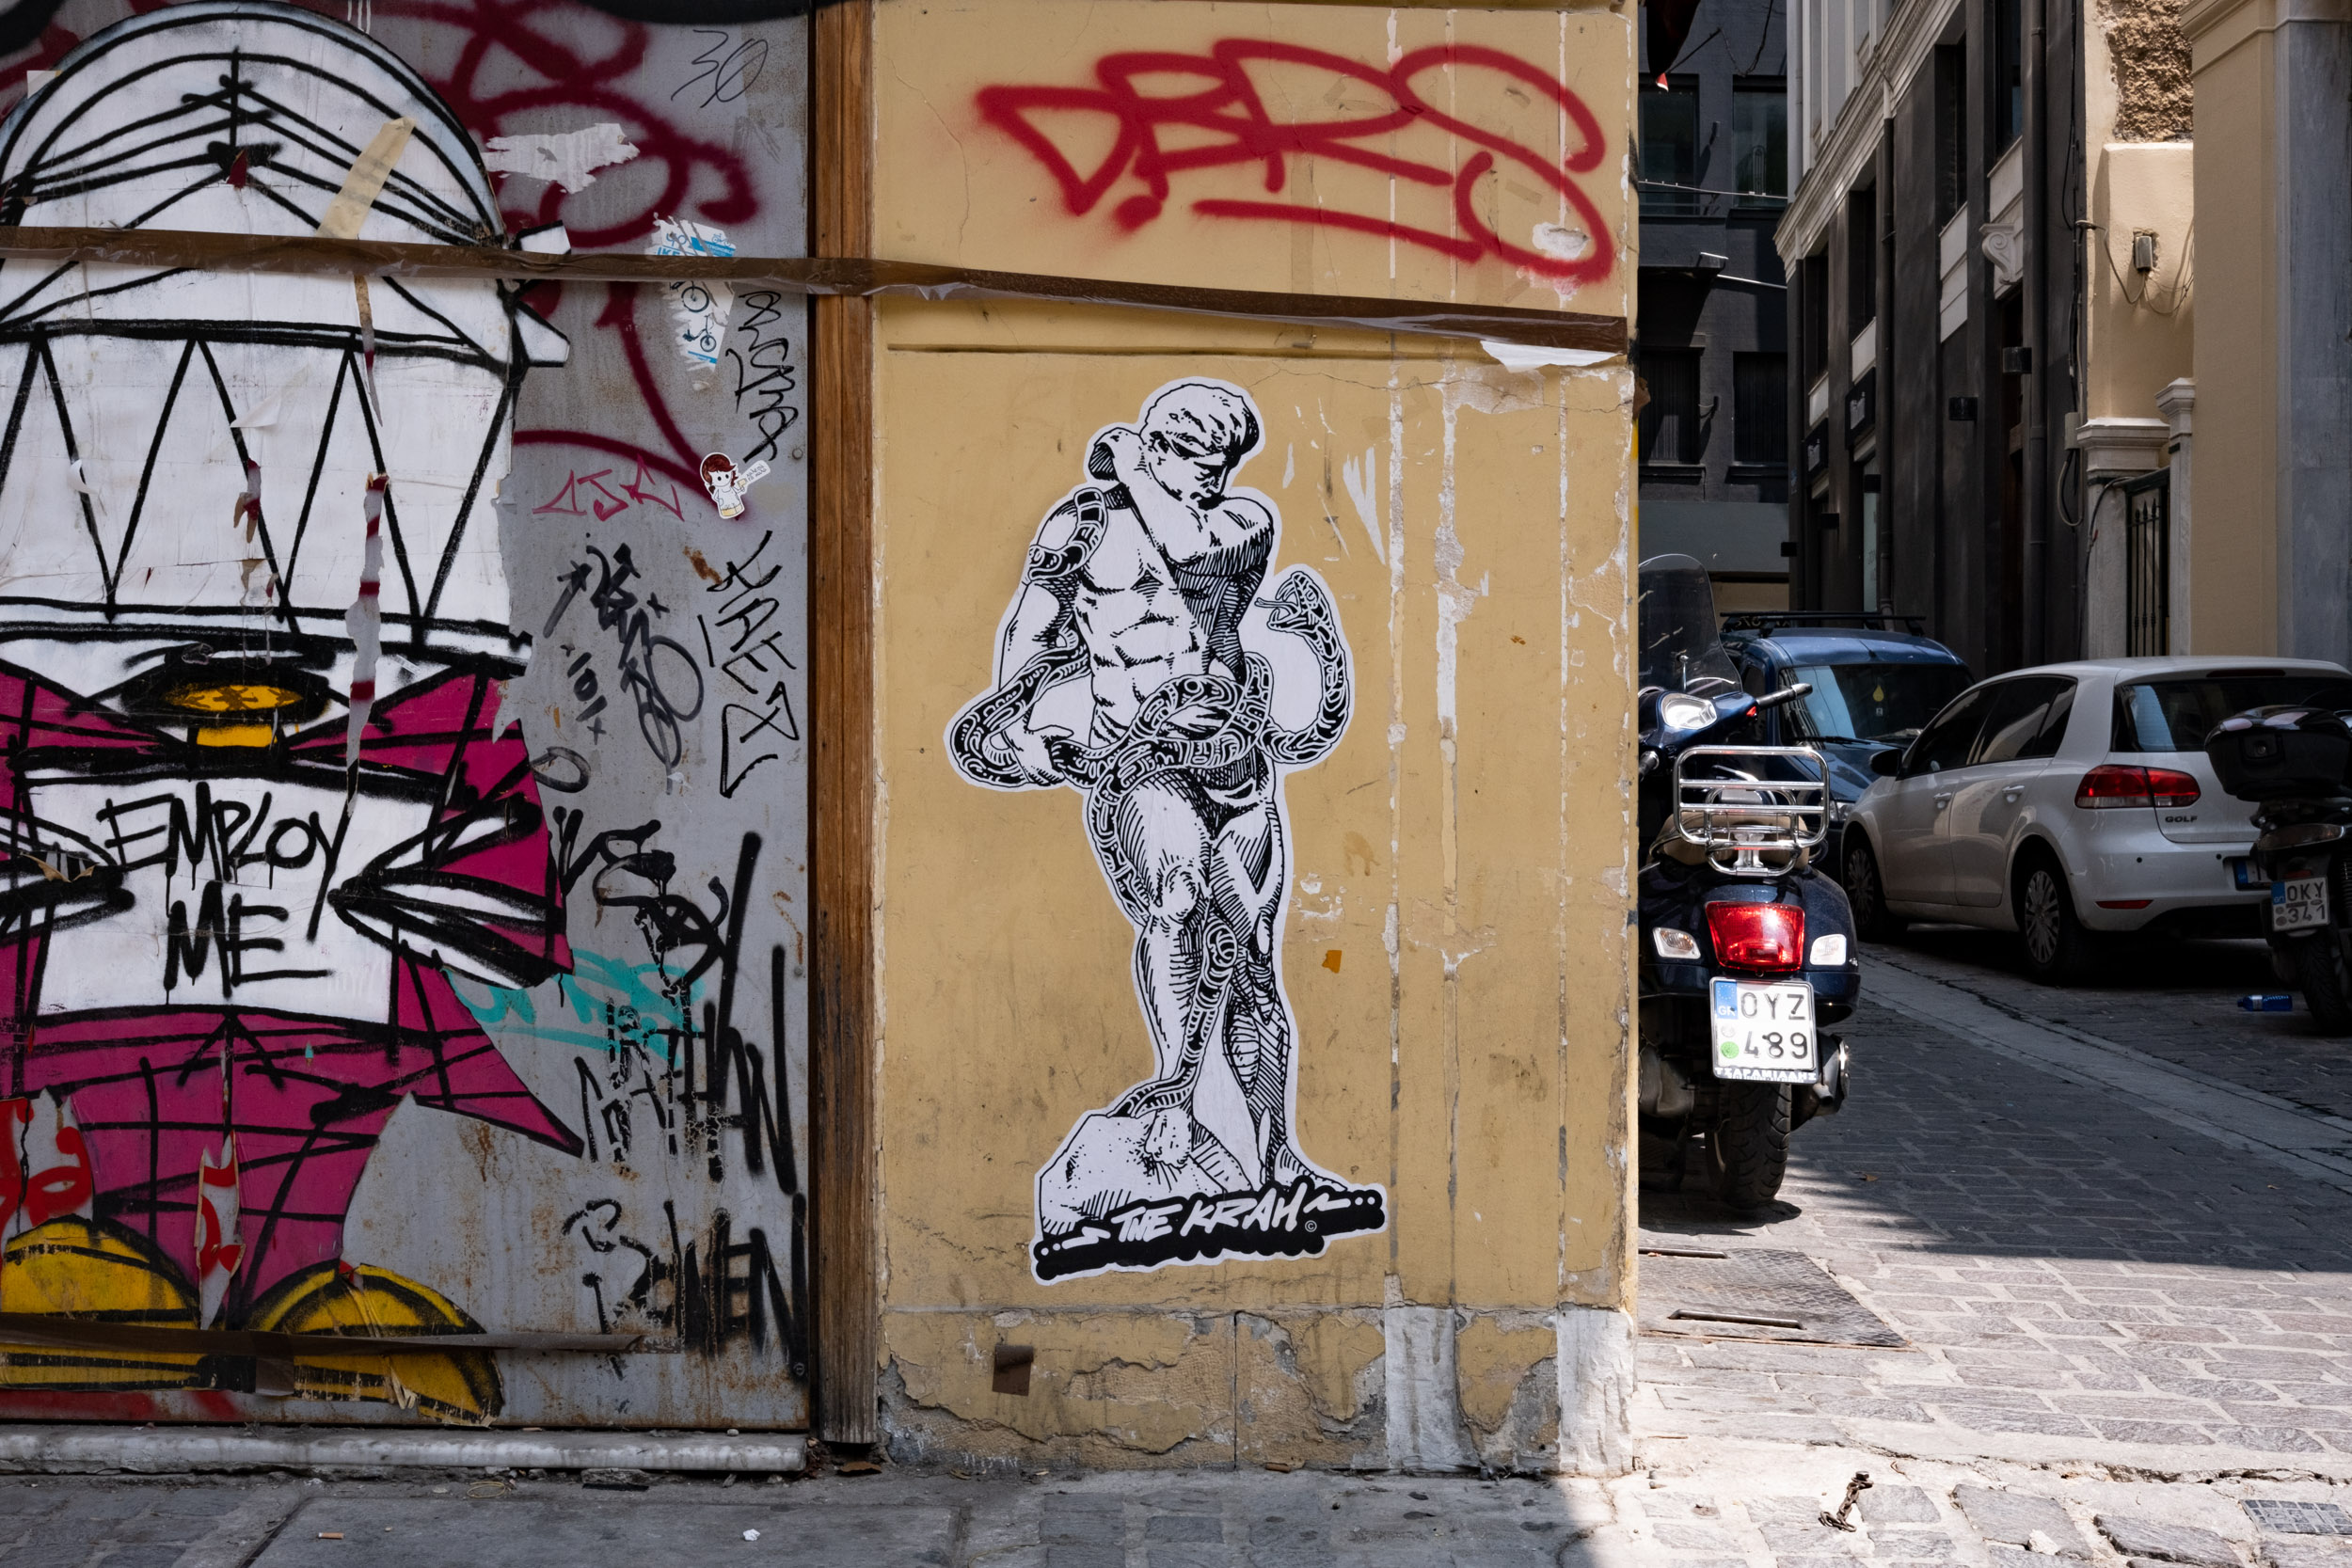 A wallpaper in Athens by street-artist "The Krah"